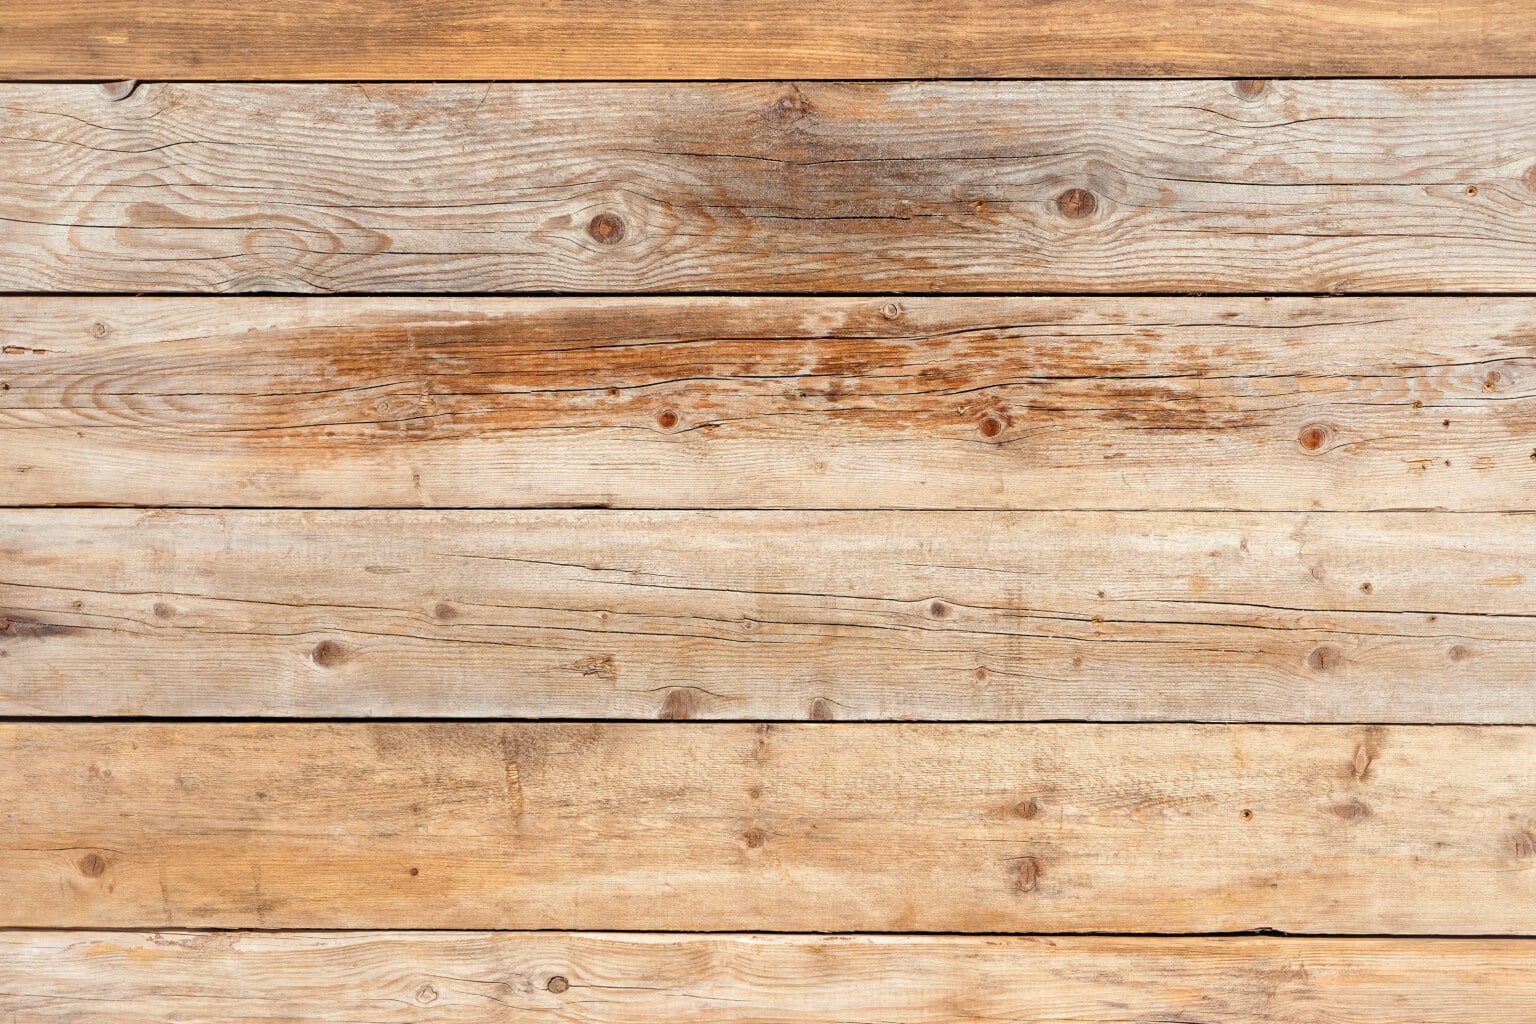 The Effect of Light on Hardwood Floors: How to Prevent Fading